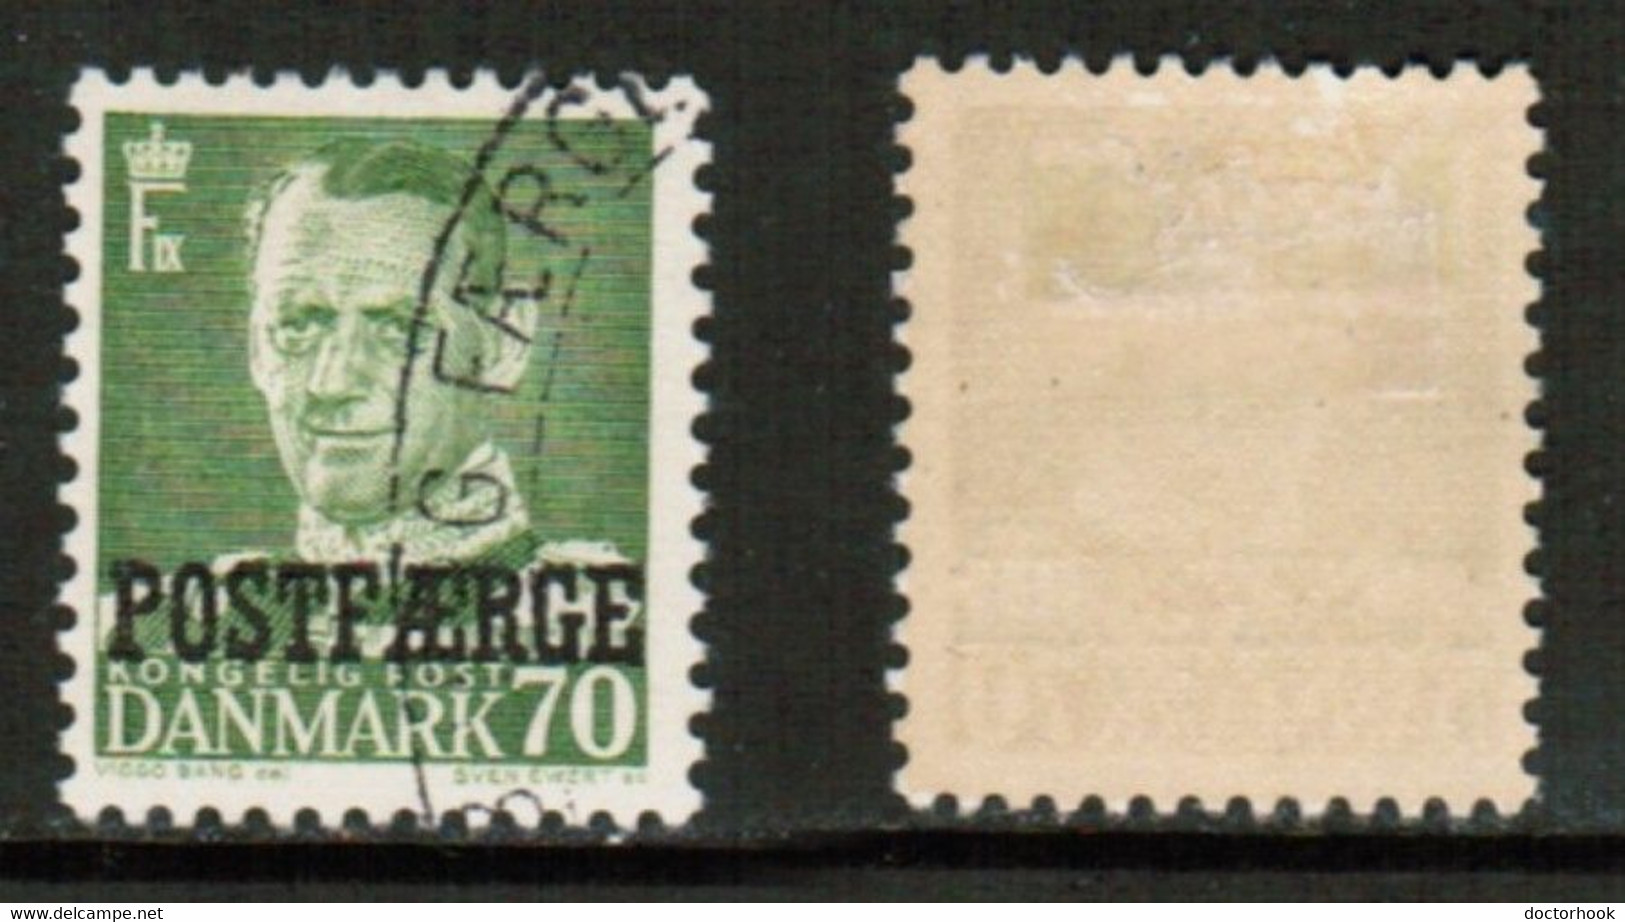 DENMARK   Scott # Q 39 USED (CONDITION AS PER SCAN) (Stamp Scan # 864-17) - Colis Postaux